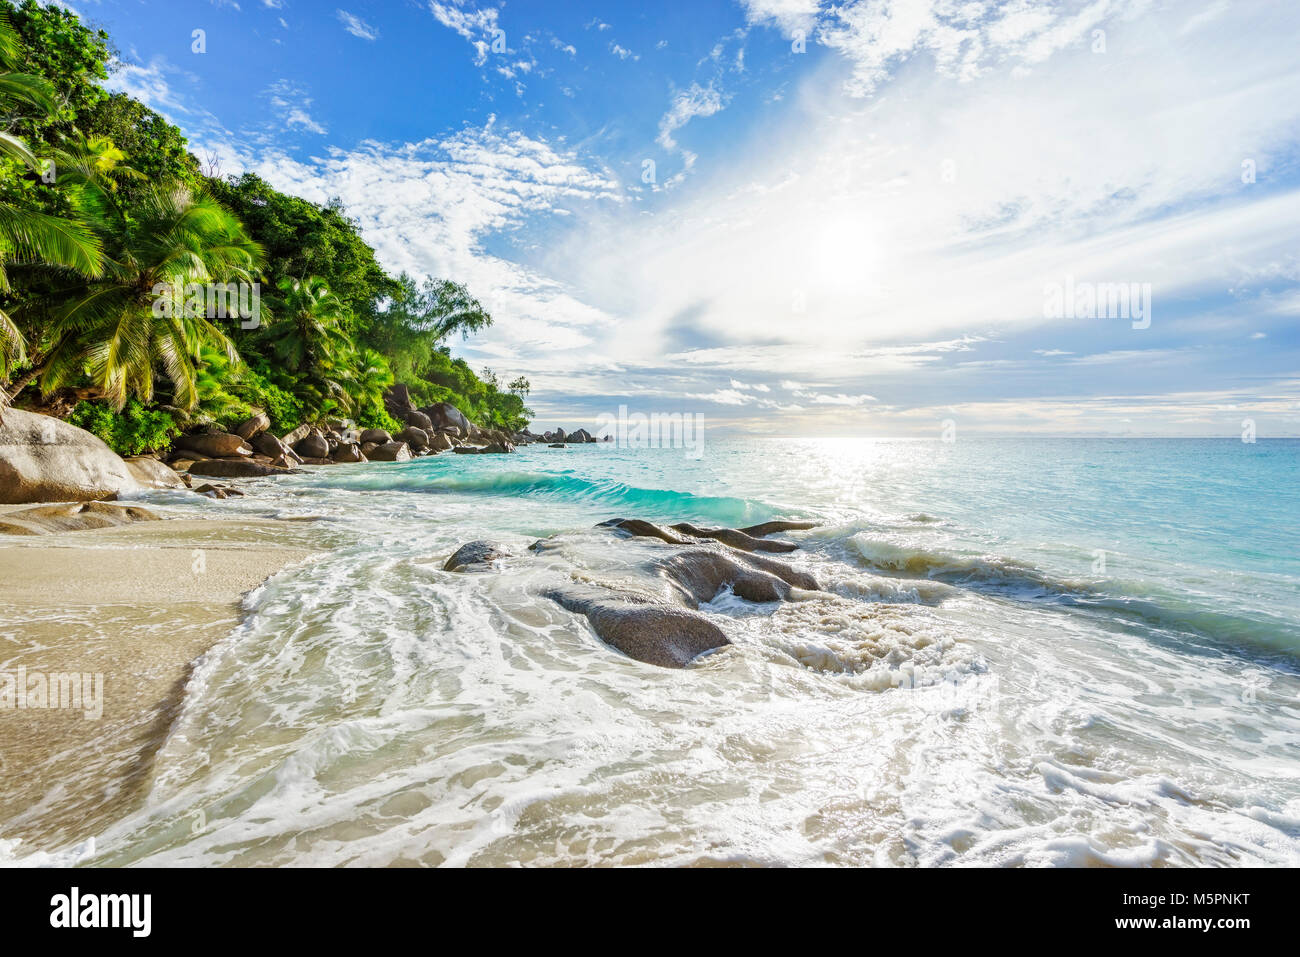 Amazing beautiful paradise tropical beach with granite rocks,palm trees and turquoise water in sunshine at anse georgette, praslin, seychelles Stock Photo